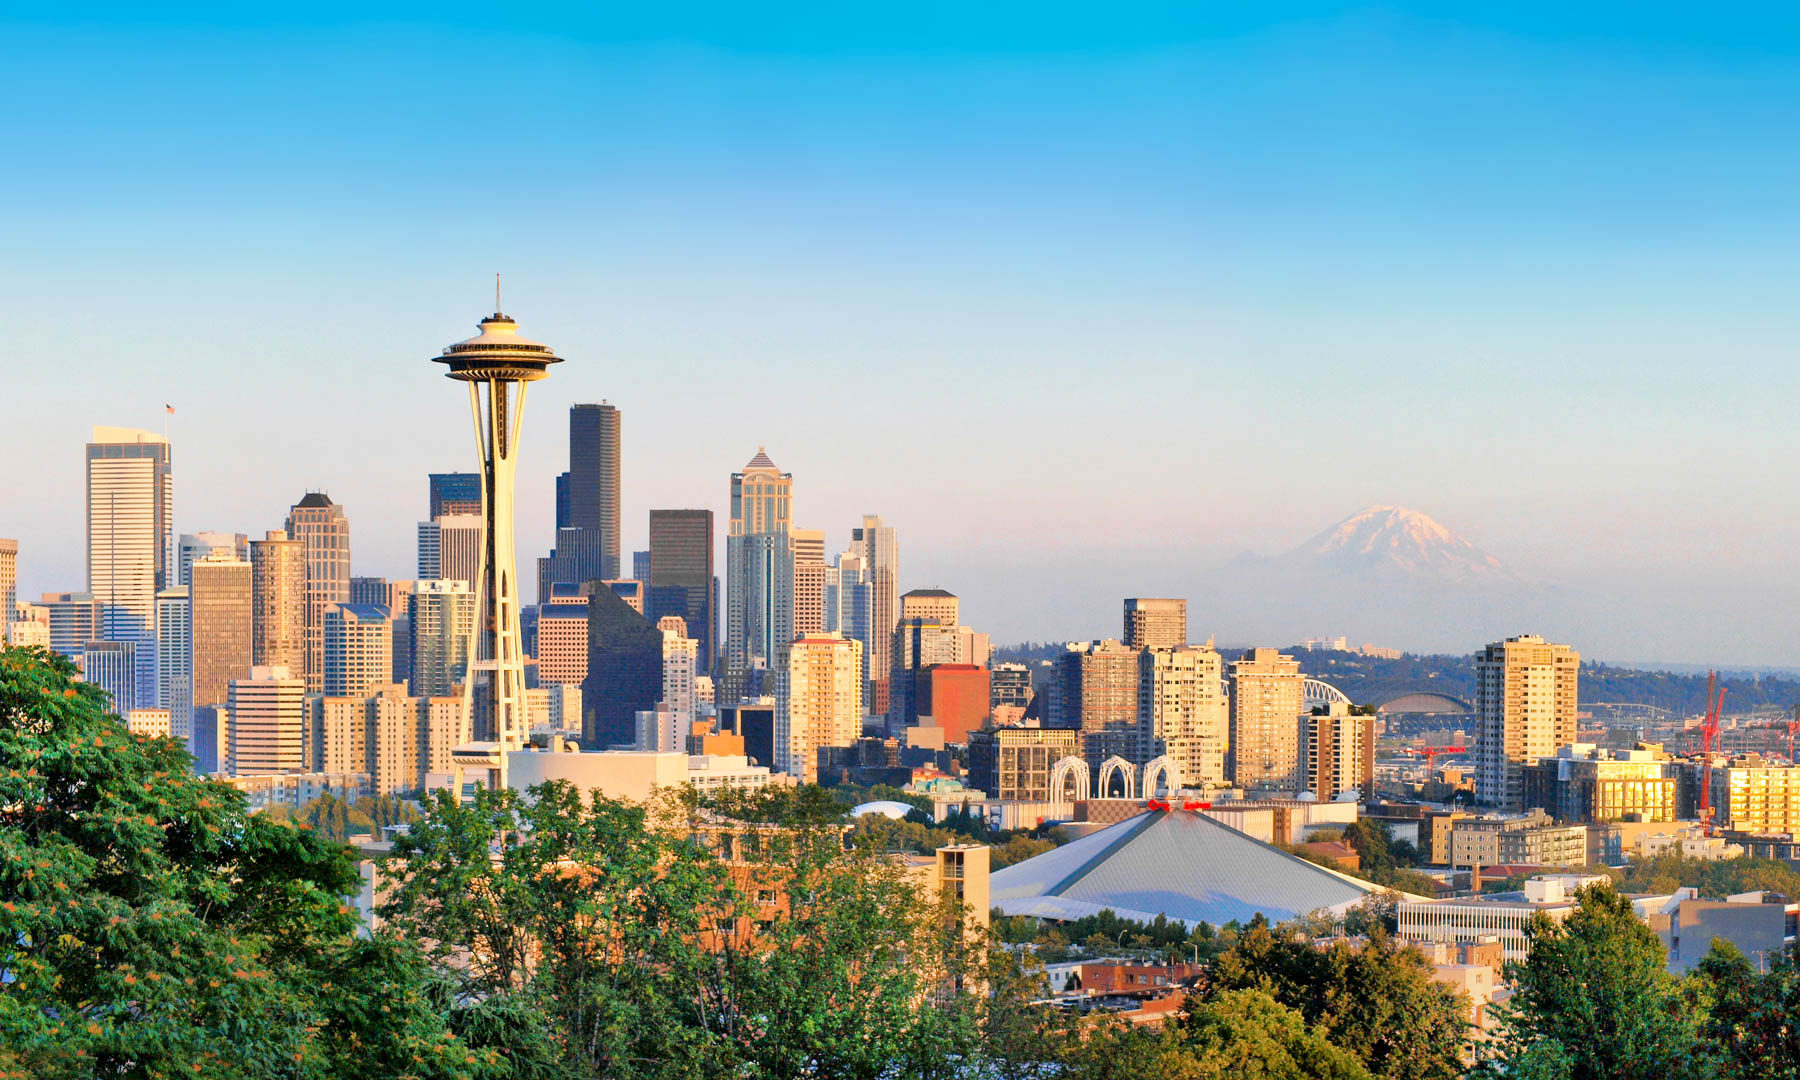 Best Things to do in Washington: Space Needle & Seattle Skyline